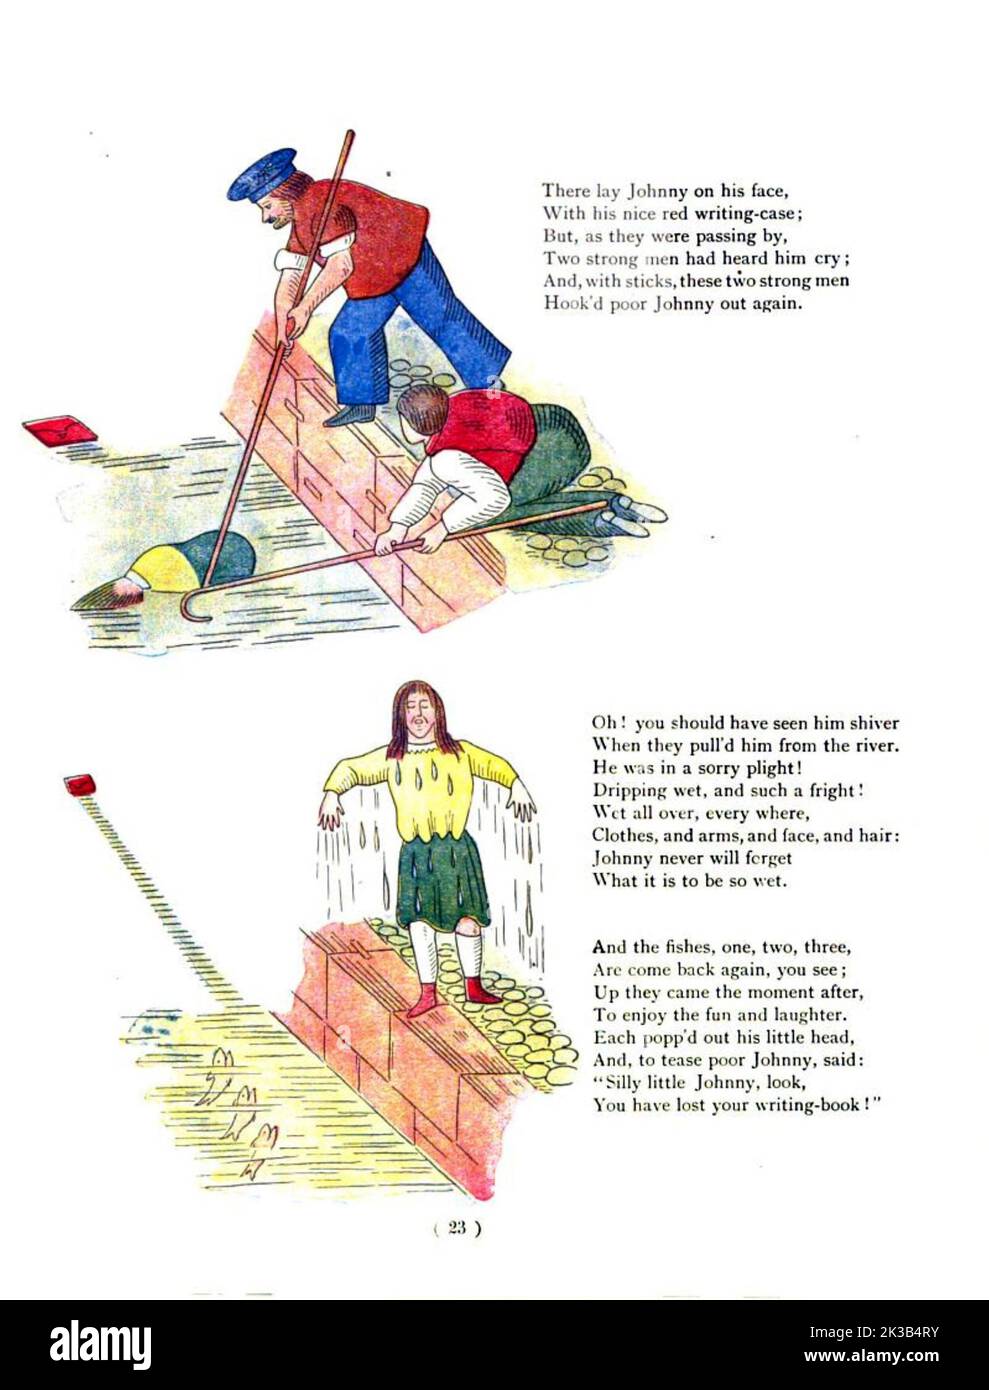 The Story of Johnny Head-in-Air from ' The Struwwelpeter painting book ' Pretty Stories and Funny Pictures for Little Children by Heinrich Hoffmann Published in London in 1900 Stock Photo